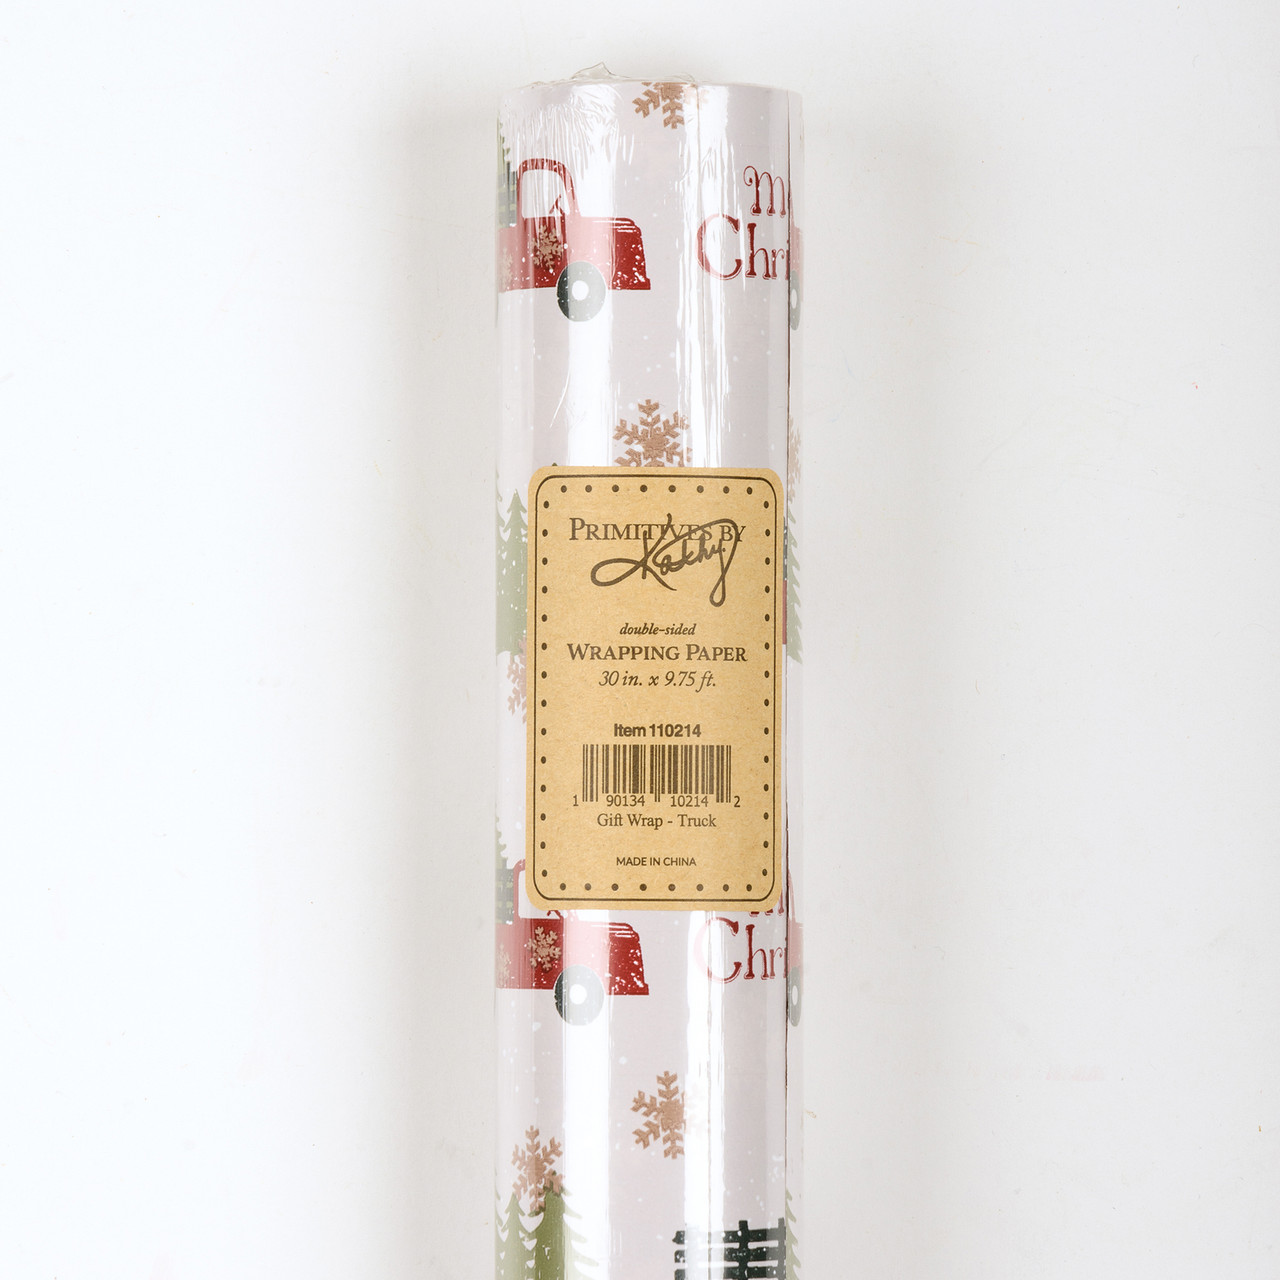 Double Sided Gift Wrapping Paper Roll - Holly Leaves & Black White Plaid -  9.75 Feet x 30 Inch from Primitives by Kathy - Cherryland Sales